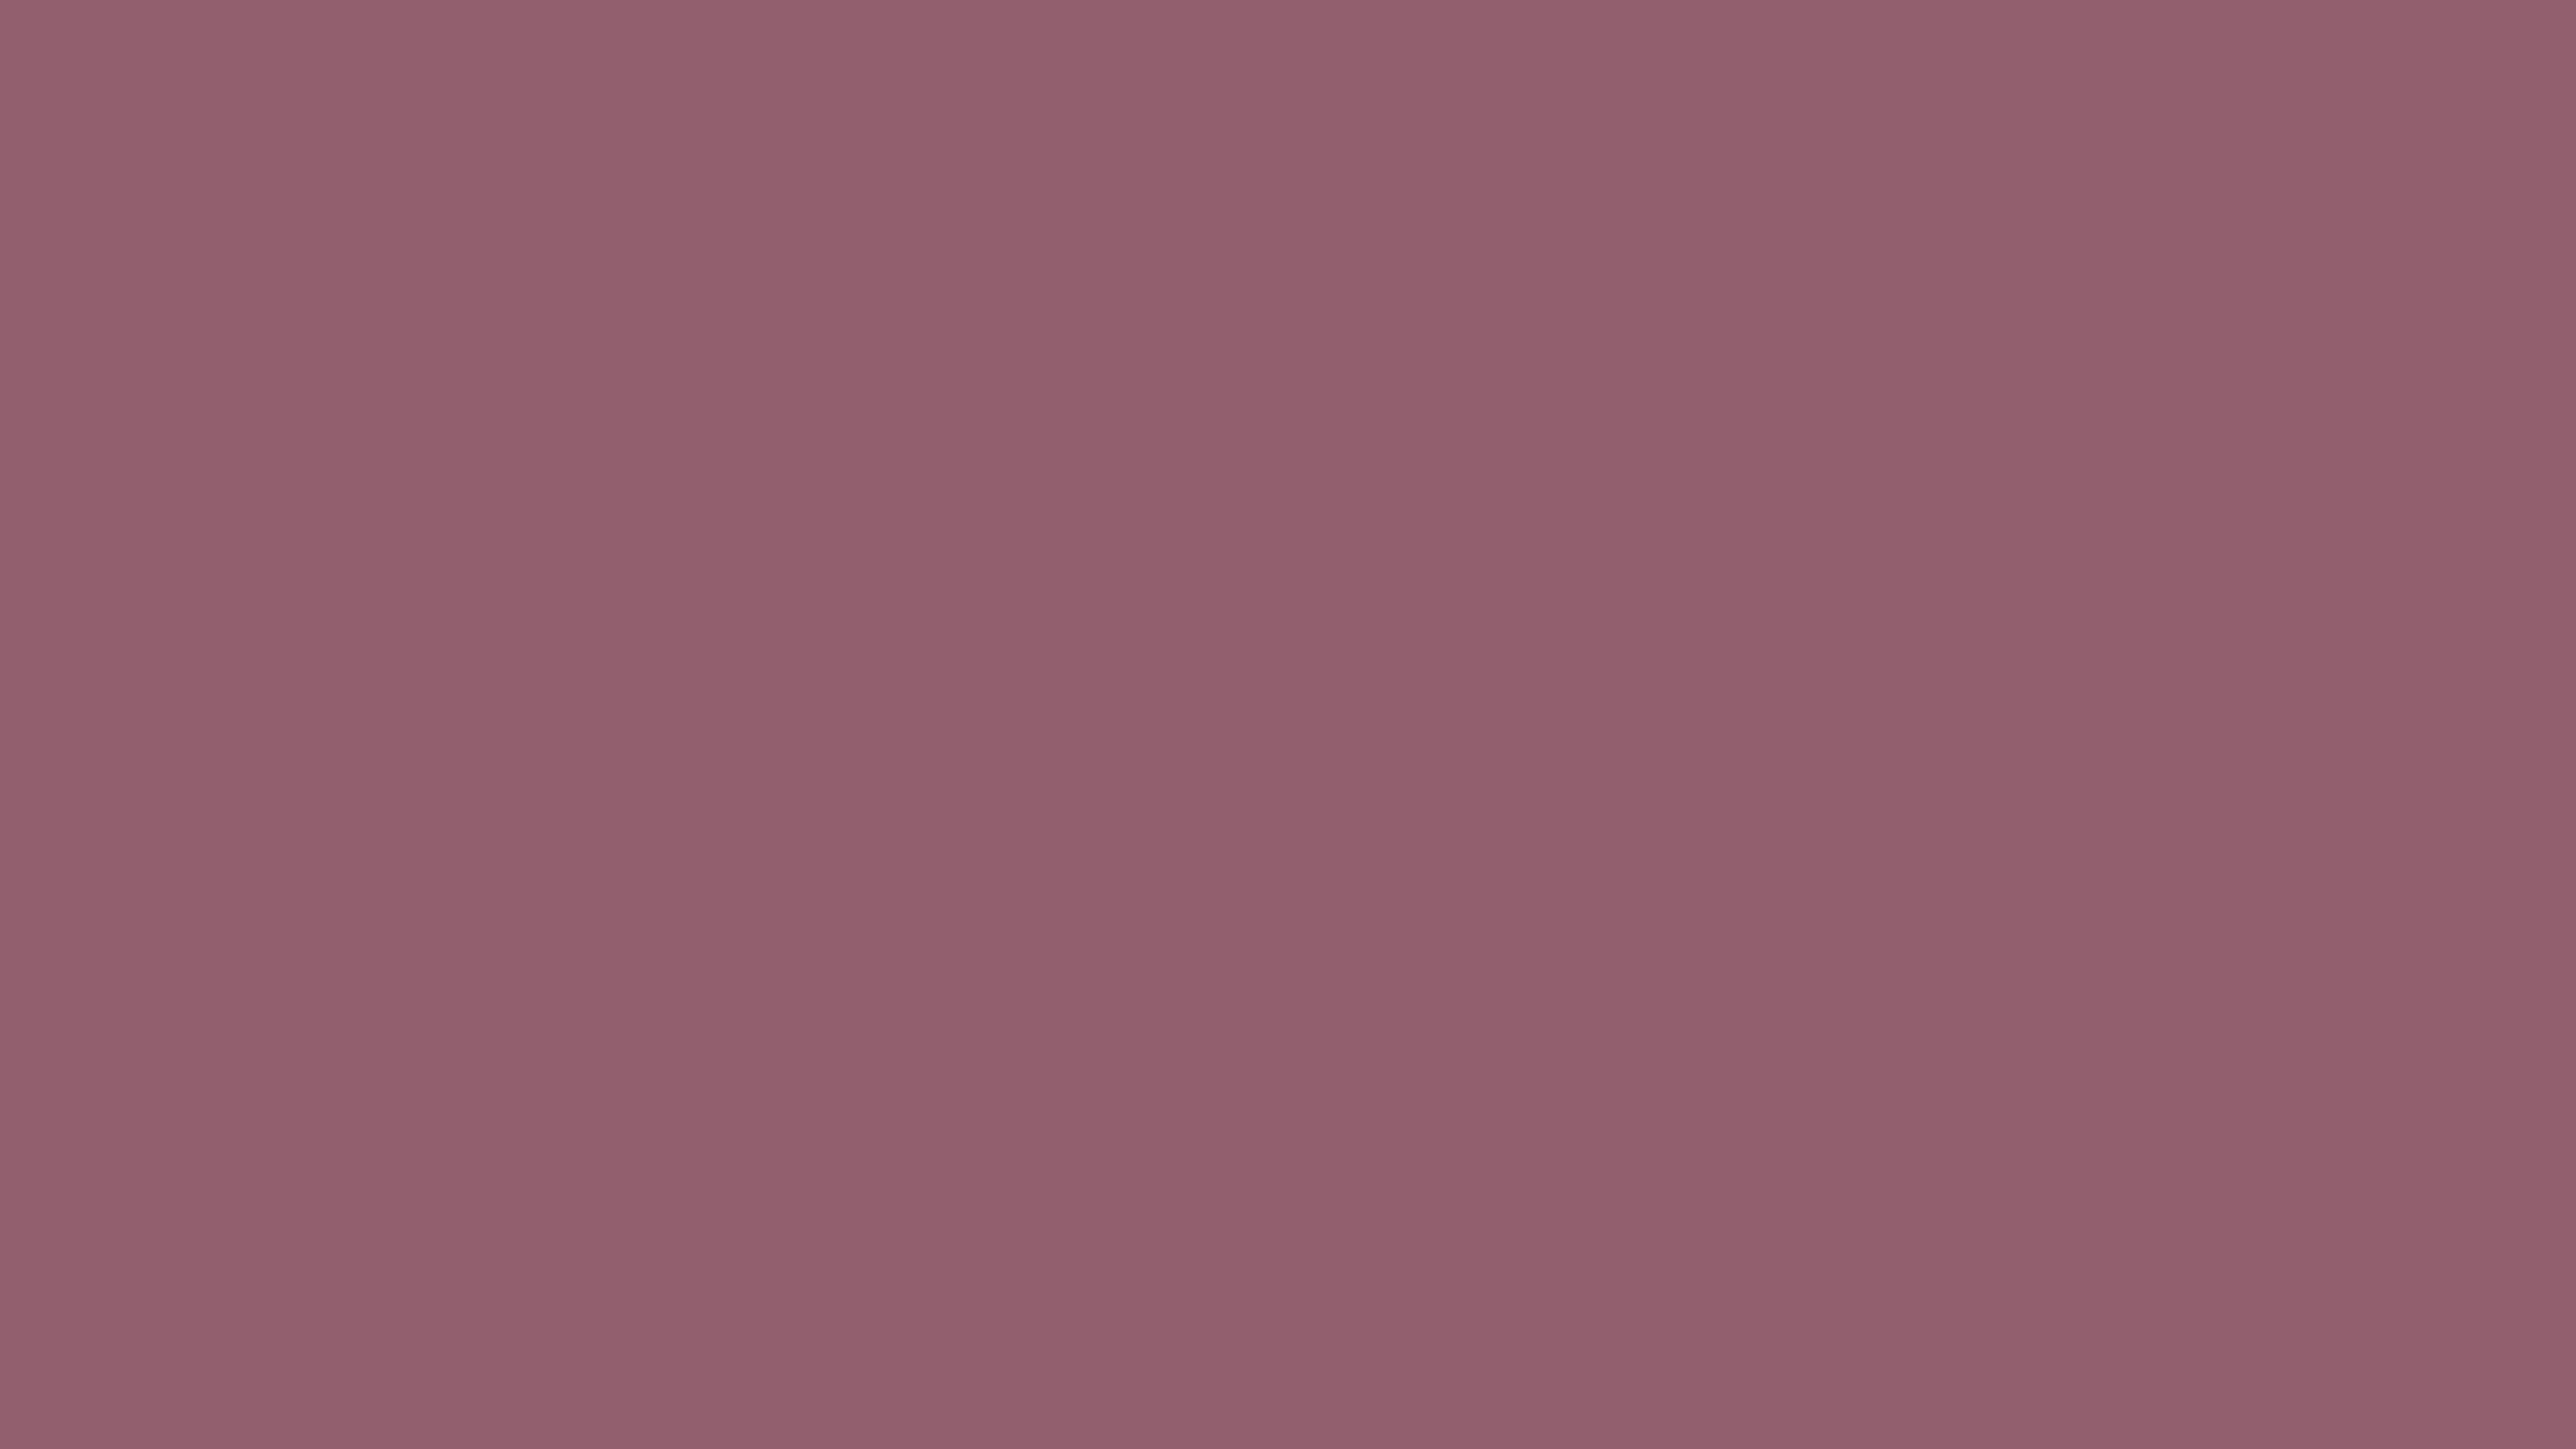 5120x2880 Raspberry Glace Solid Color Background